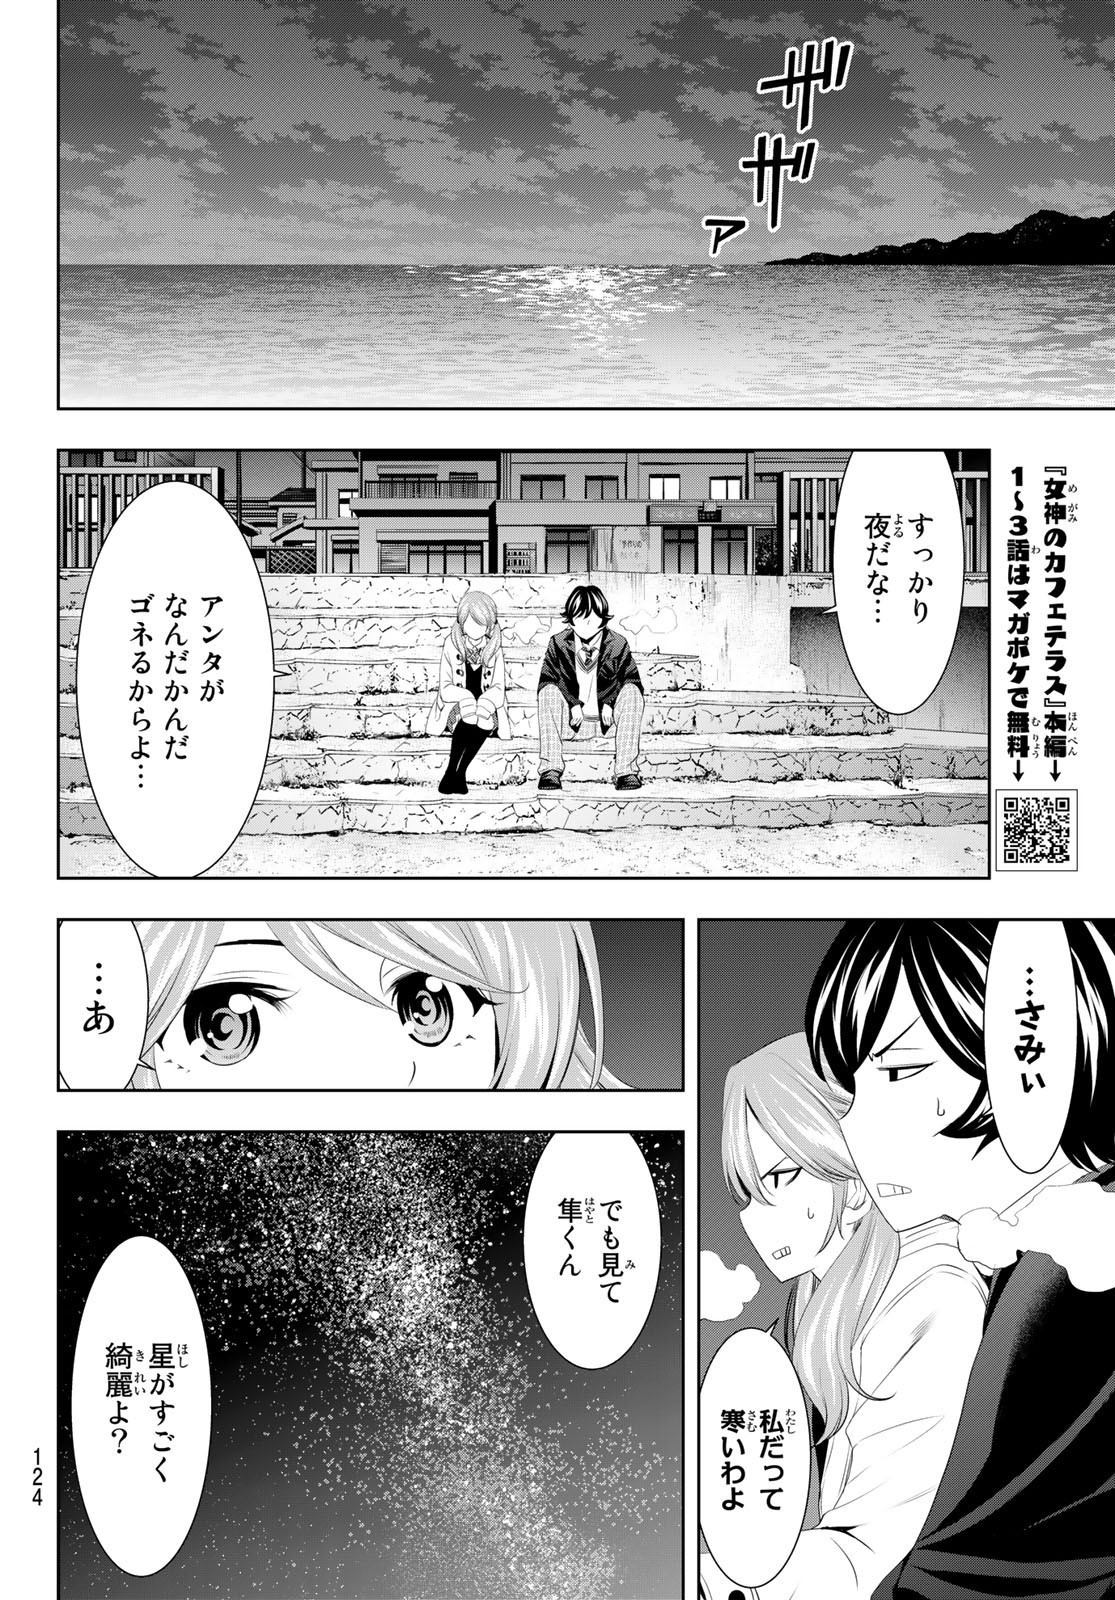 Weekly Shōnen Magazine - 週刊少年マガジン - Chapter 2022-48 - Page 119